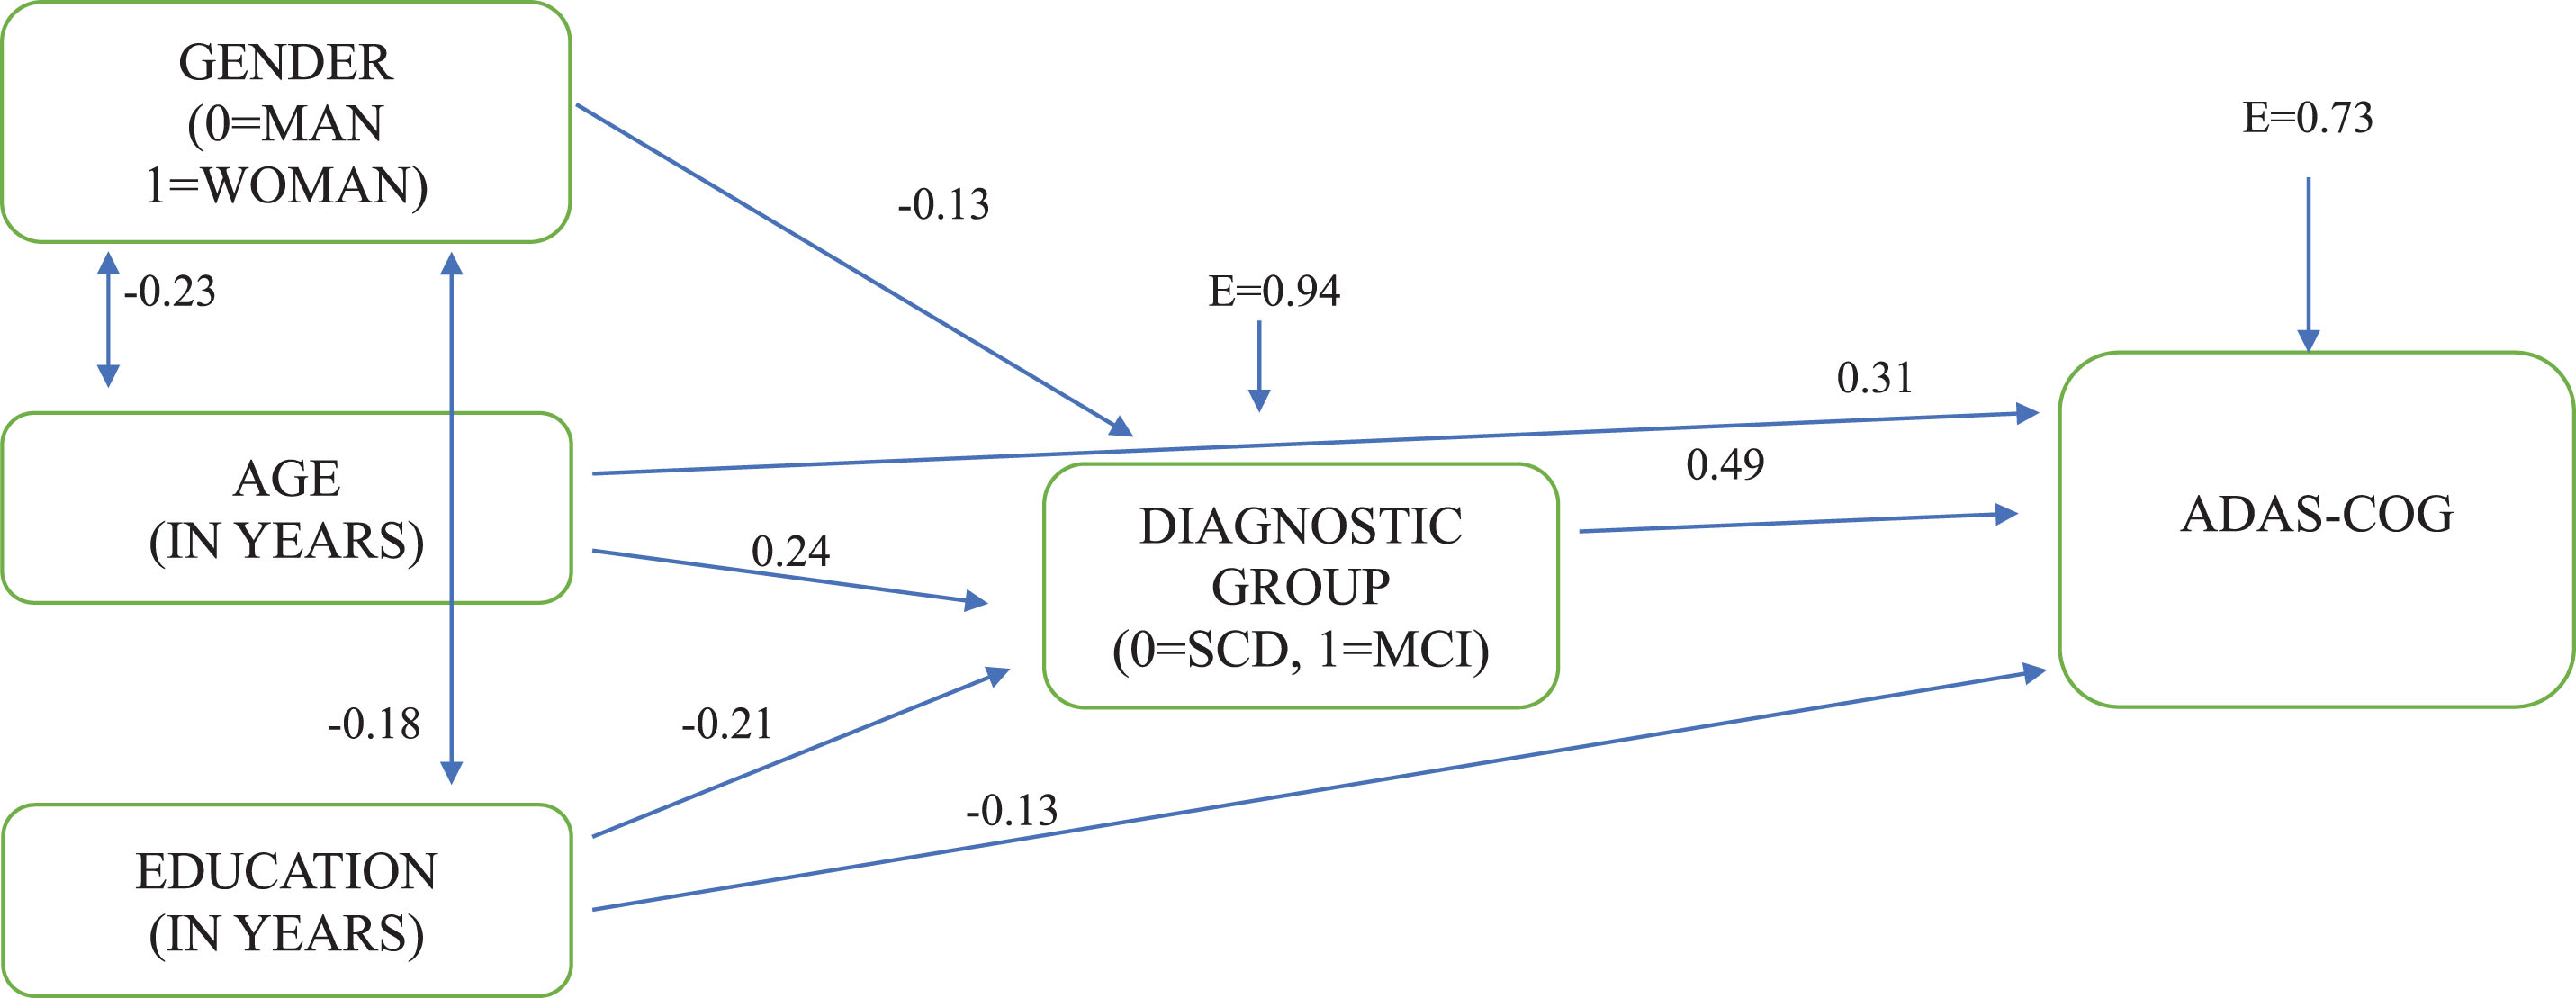 The directional relationships between demographic factors, diagnostic group, and ADAS-COG total score. *All paths are significant at p < 0.05; E, measurement error.